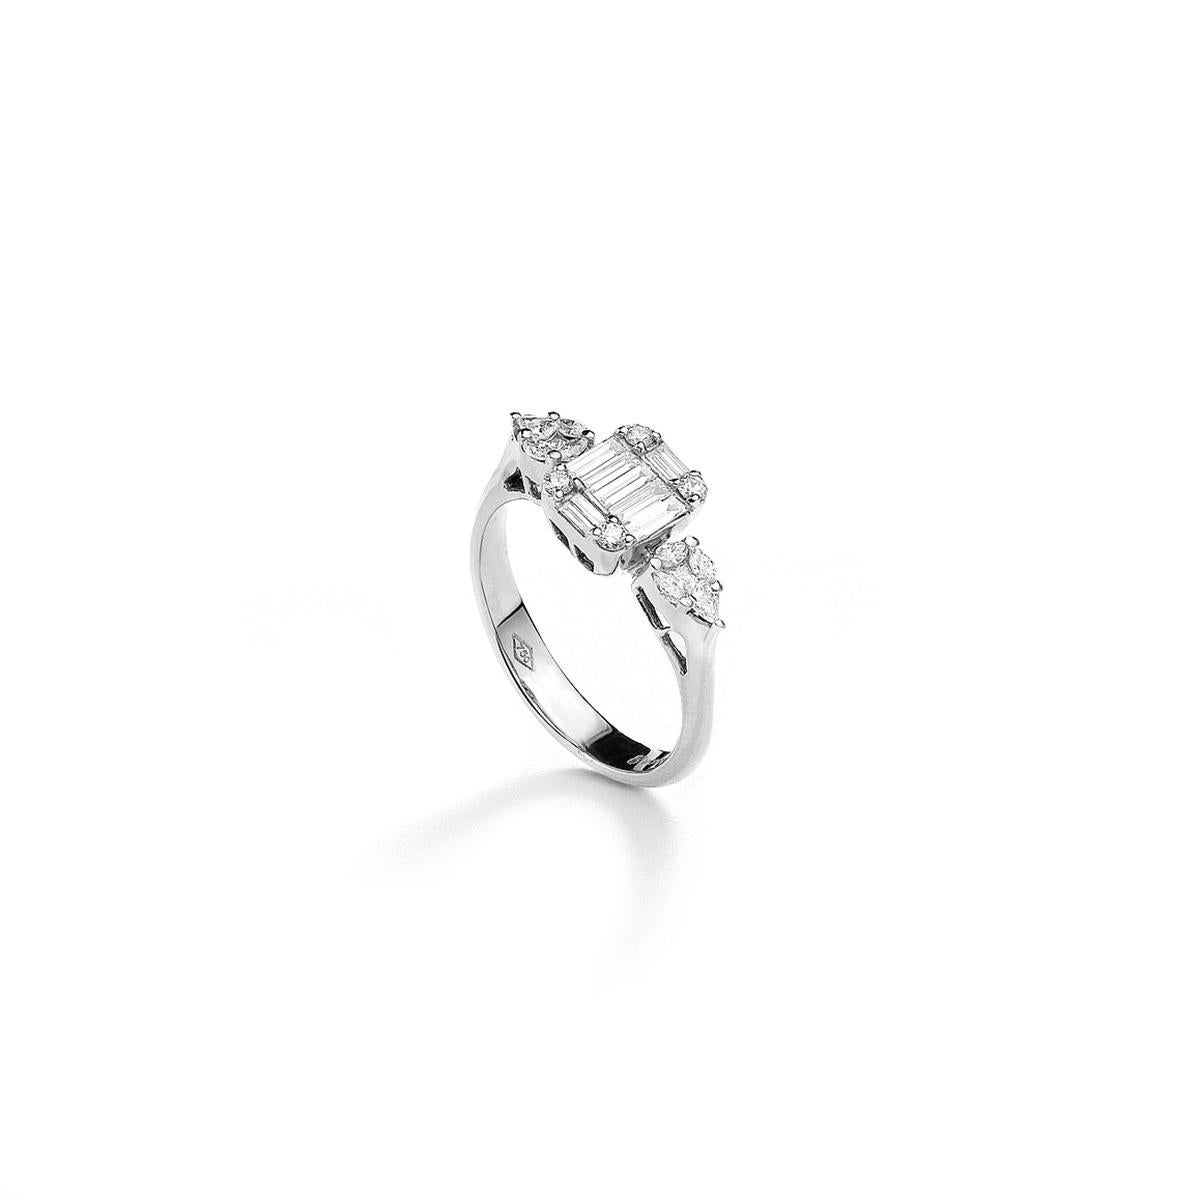 Ring in 18kt white gold set with 20 princess, marquise, pear shaped and baguette cut diamonds 0.53 cts and 4 diamonds 0.08 cts Size 53

Total weight: 3.76 grams